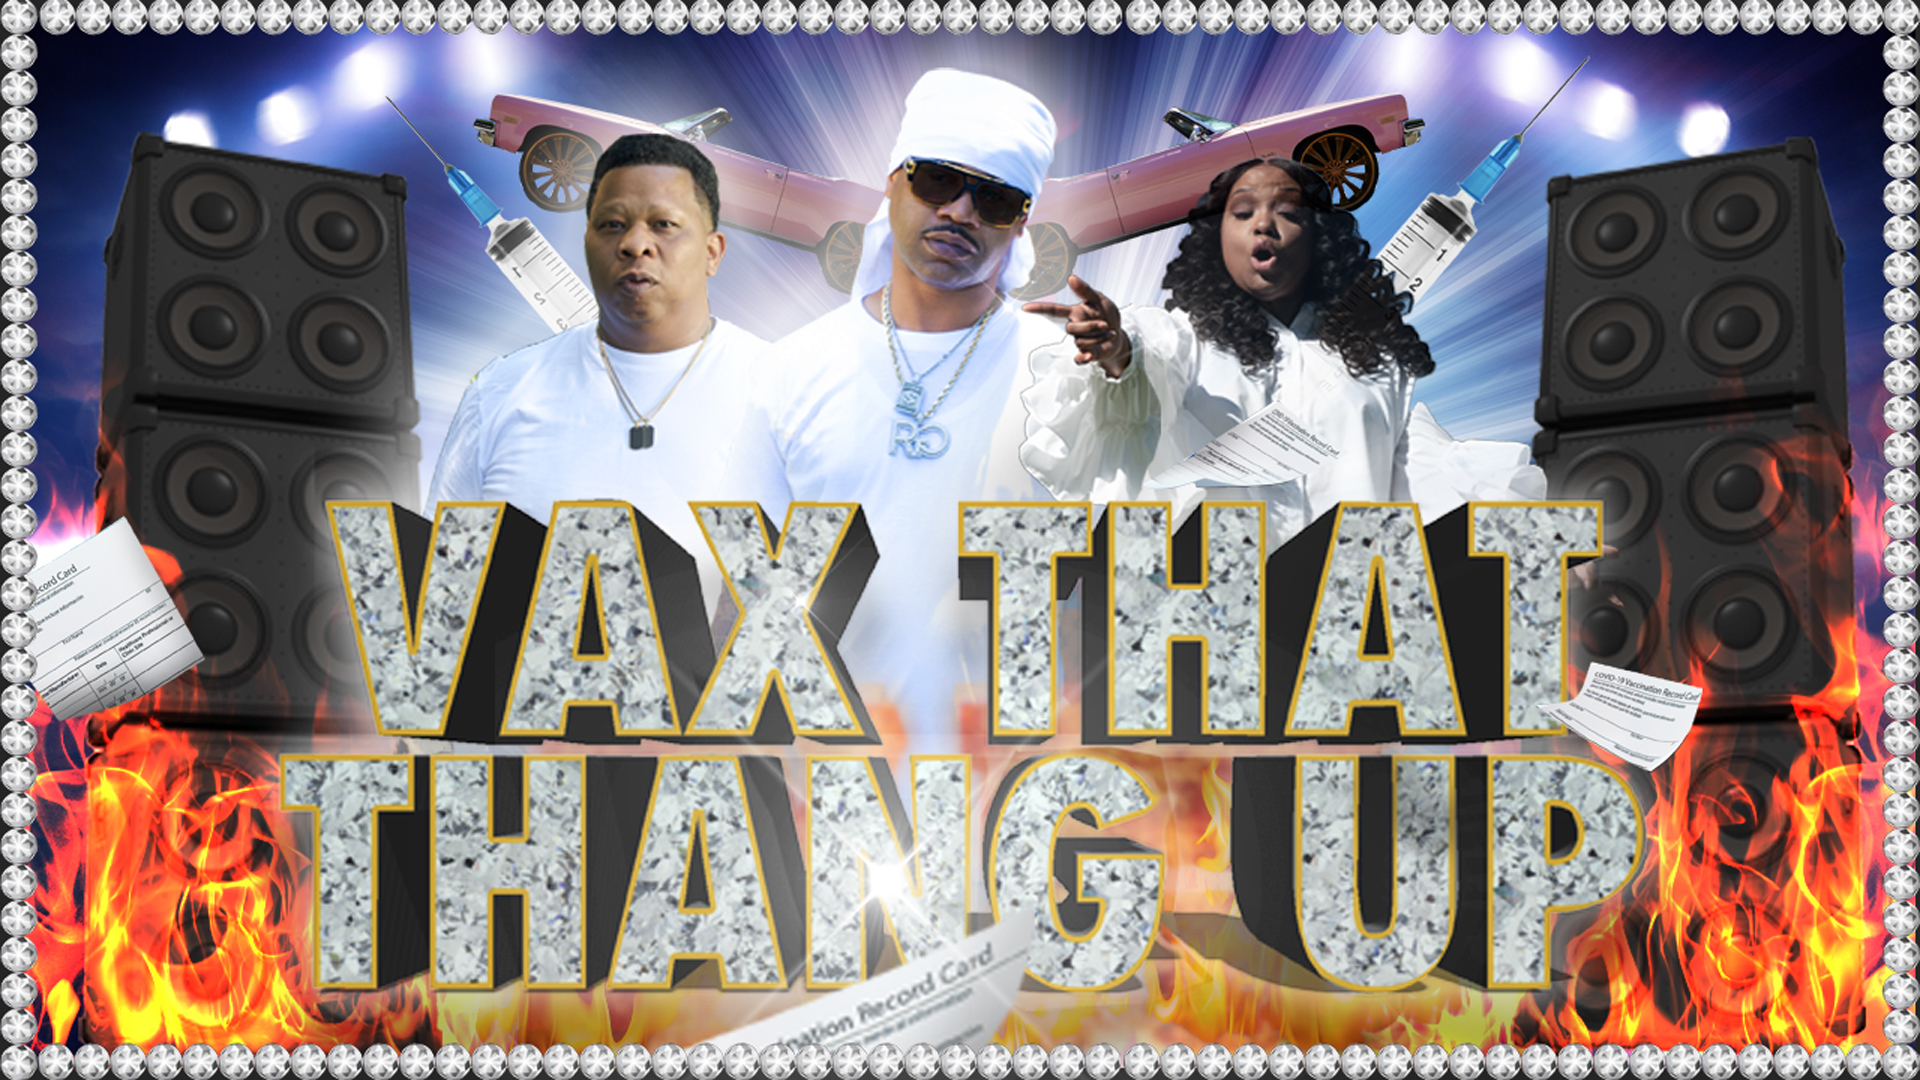 BLK Launches 'Vax That Thang Up' With Juvenile, Mannie Fresh, & Mia X